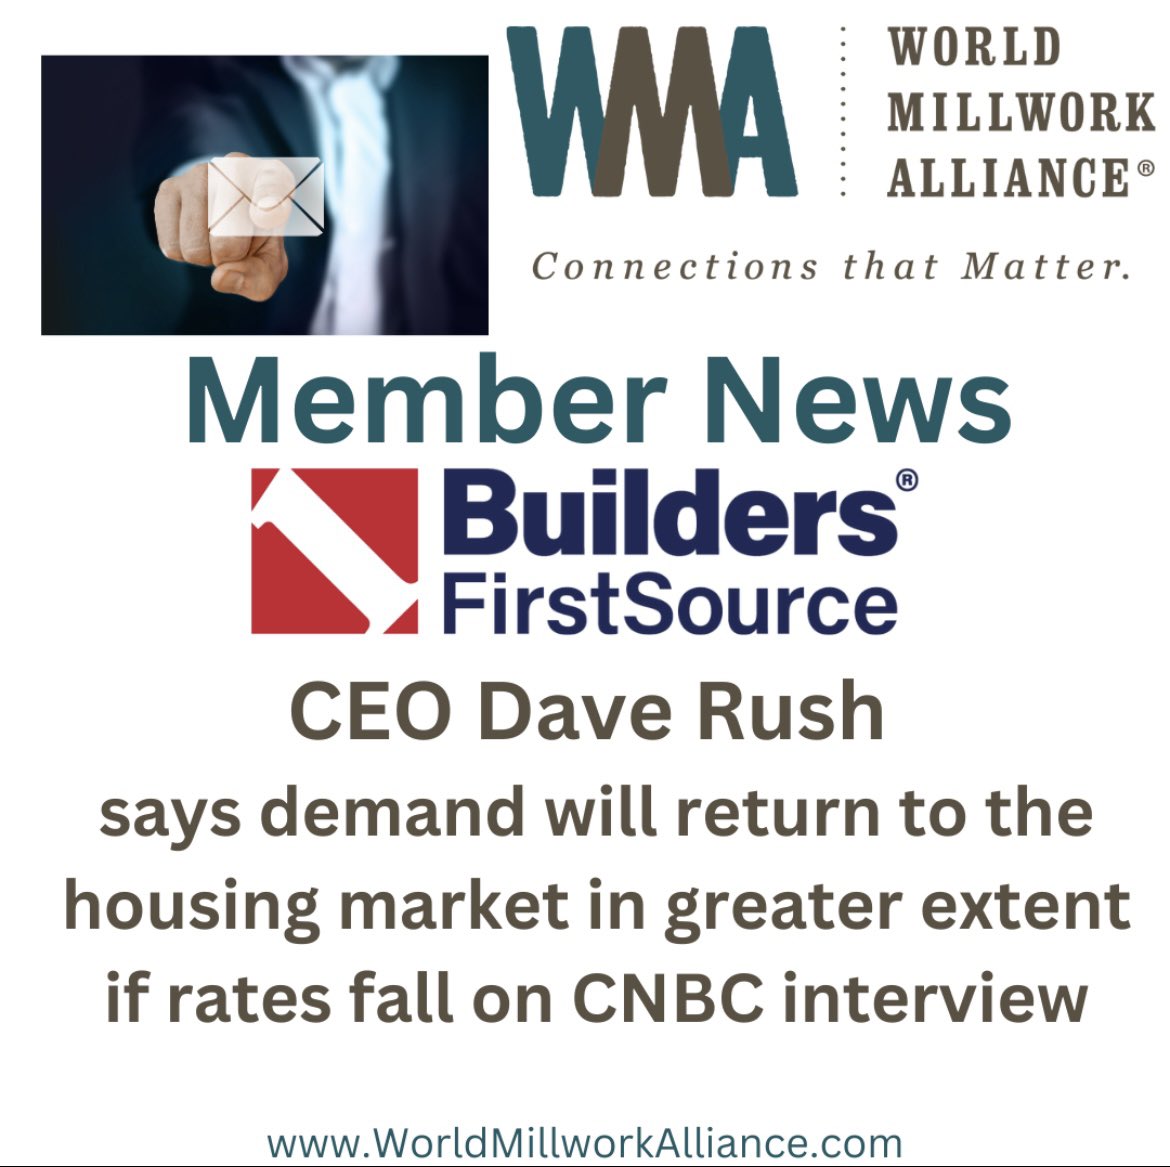 Builders FirstSource CEO, Dave Rush, was featured on CNBC’s Squawk on the Street.
 
Read more at worldmillworkalliance.com/demand-will-re…
 
#membernews #BFS #wma #WorldMillworkAlliance #millworknews